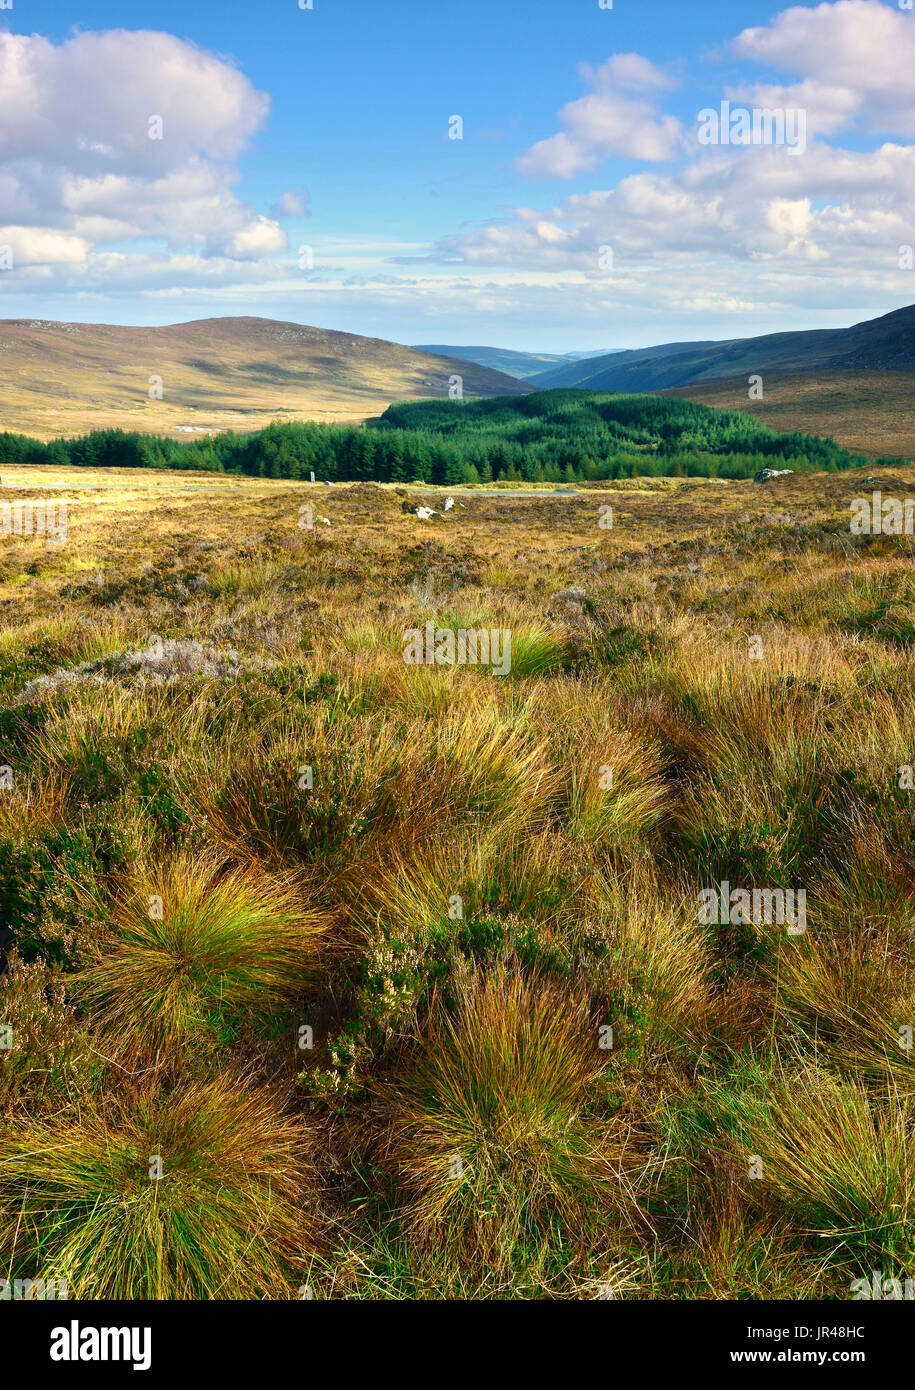 An autumn view of the Wicklow landscape near Laragh, Ireland Stock Photo